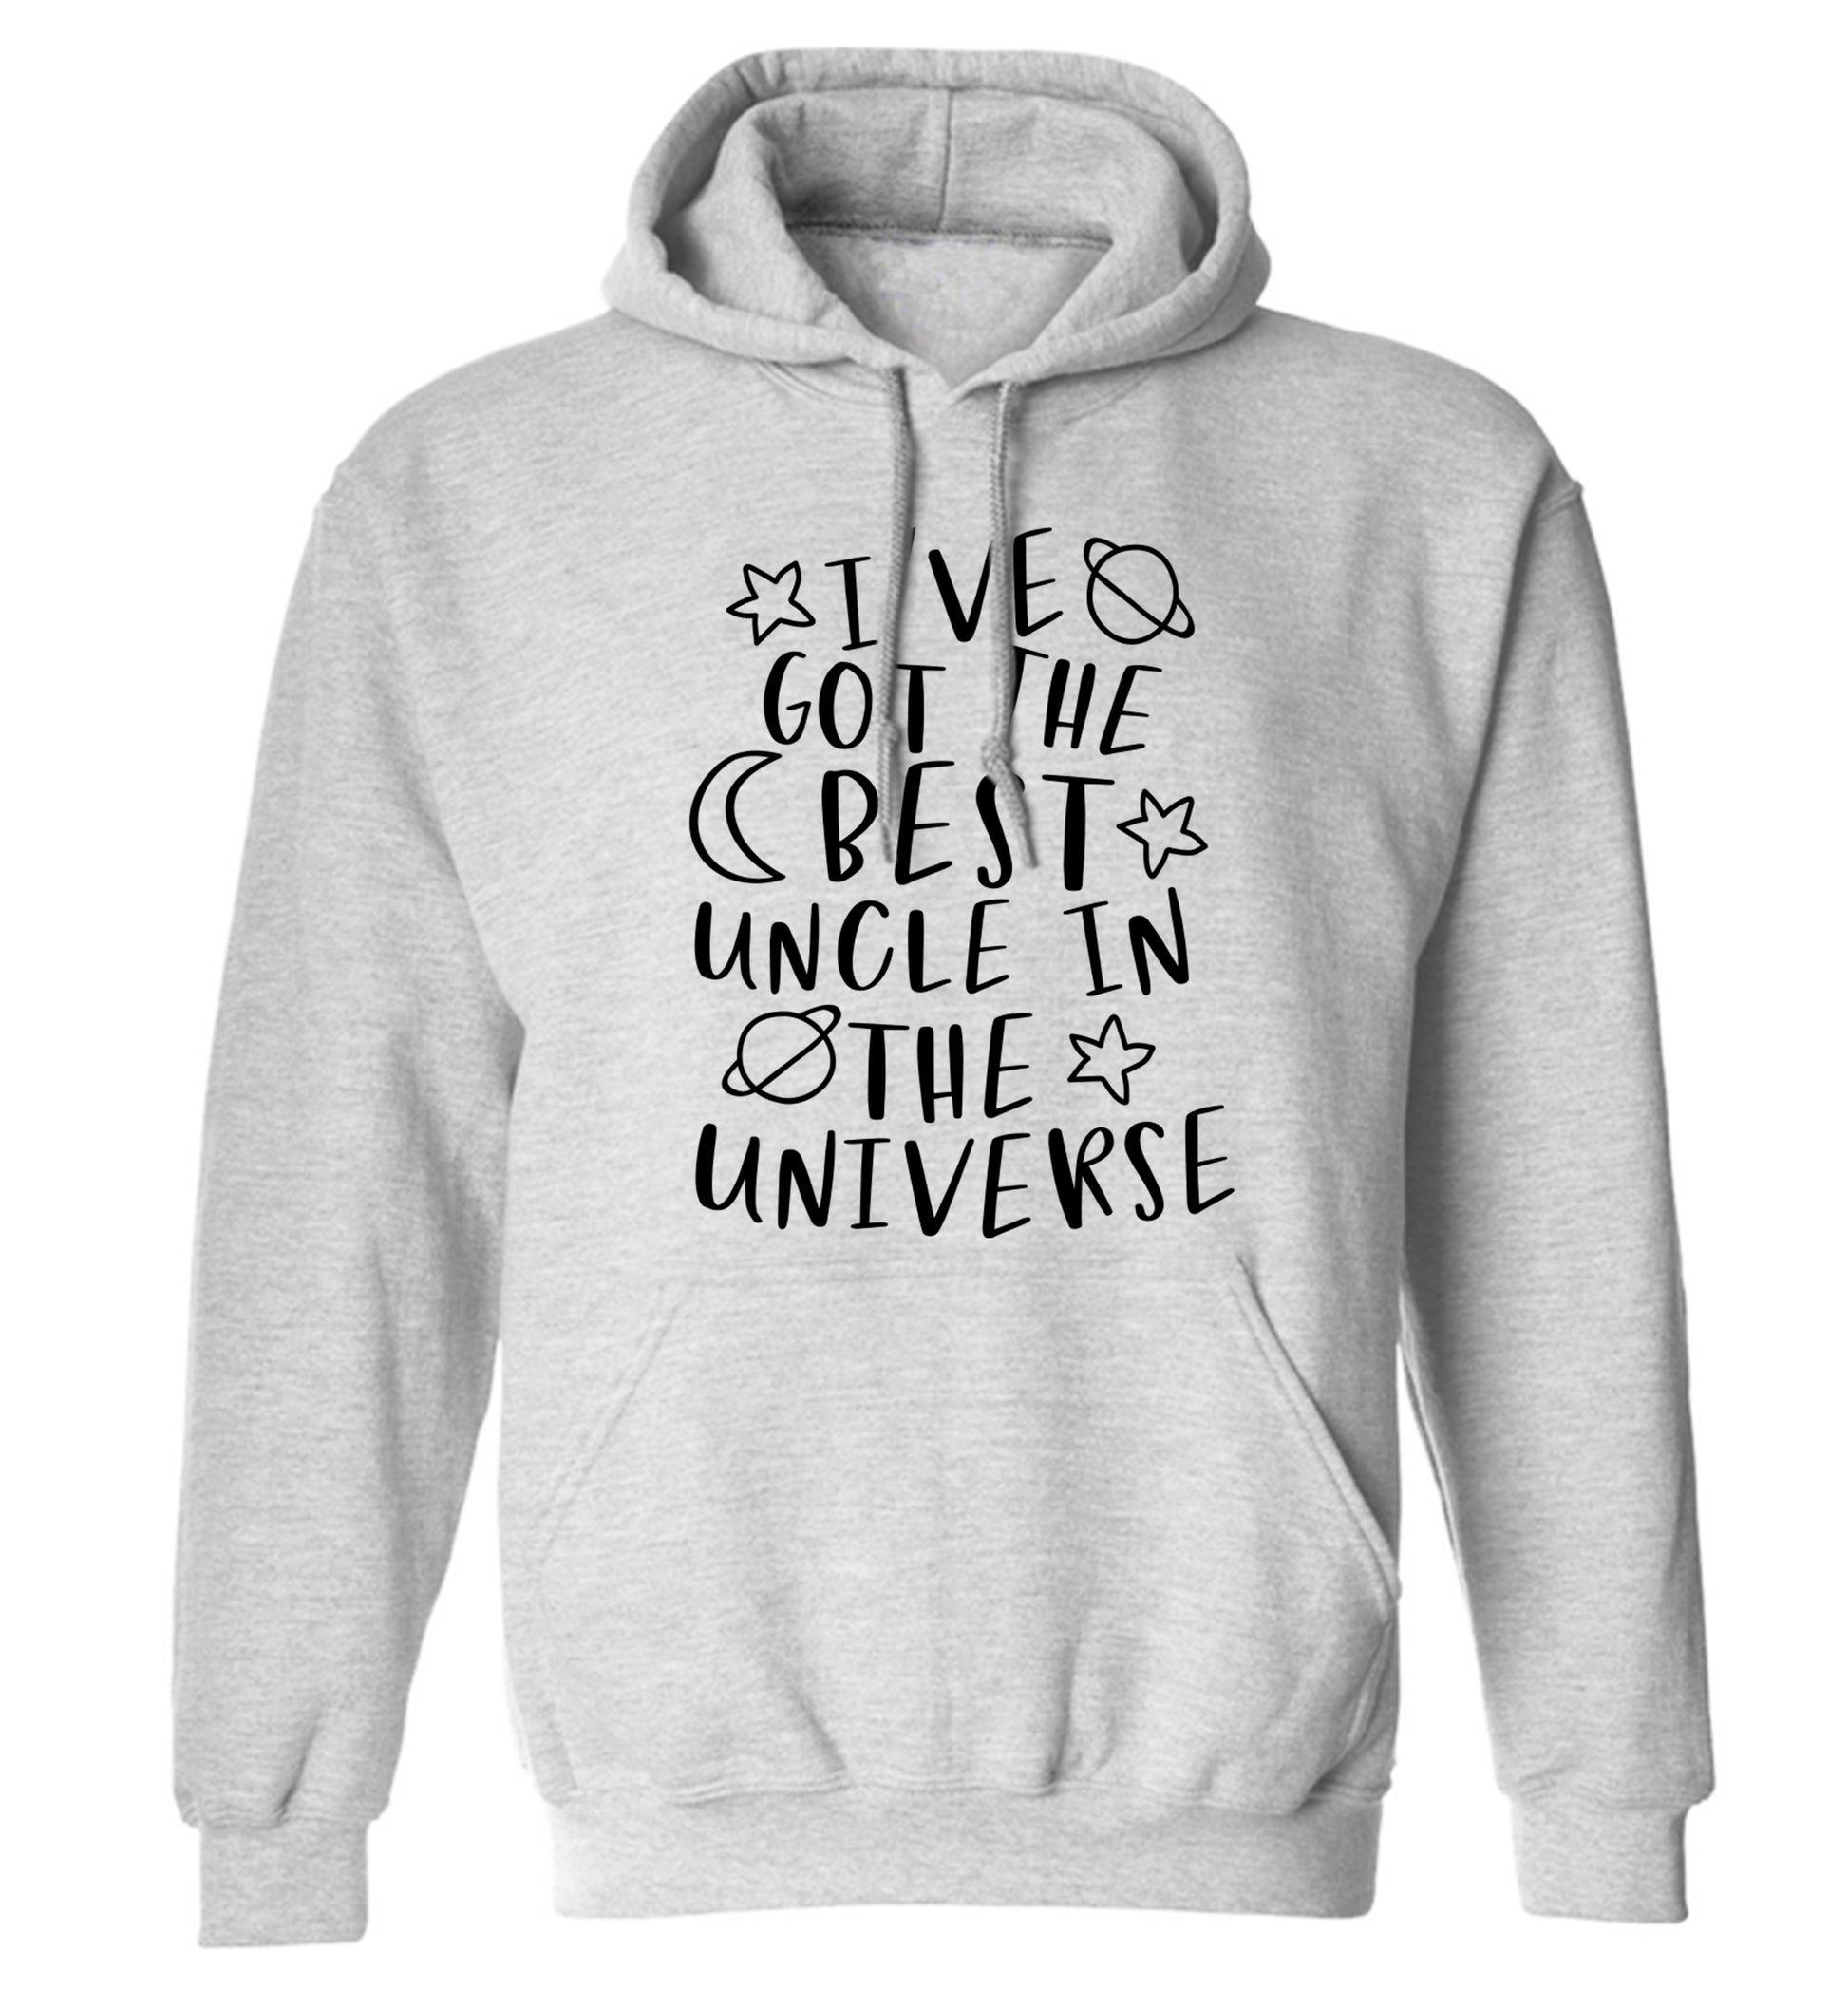 I've got the best uncle in the universe adults unisex grey hoodie 2XL